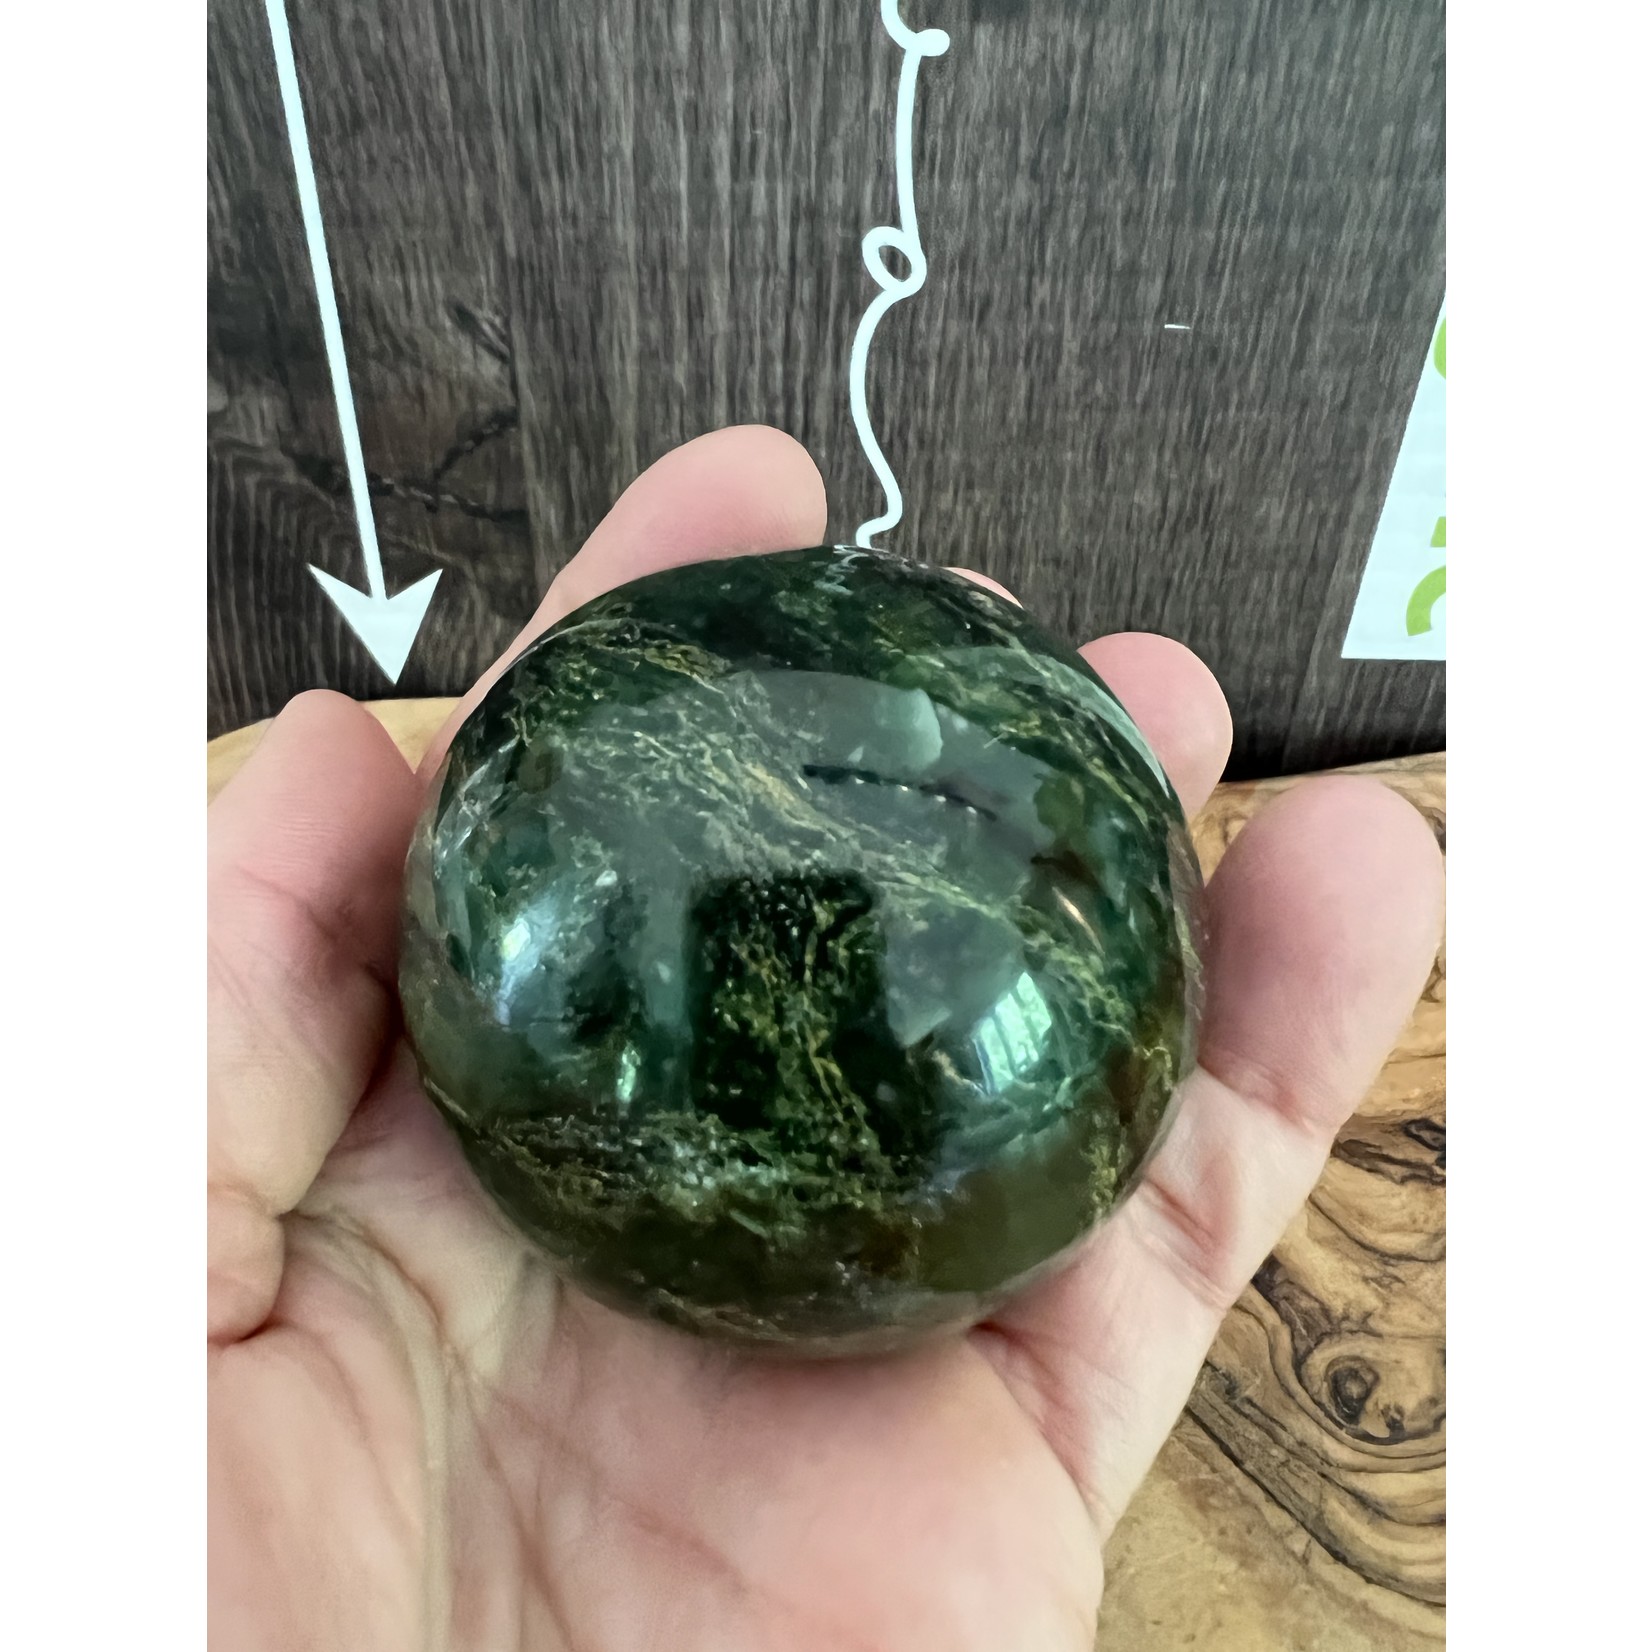 large emerald sphere, helps strengthen the immune system, has the power to fight against viral diseases such as the flu angina pectoris